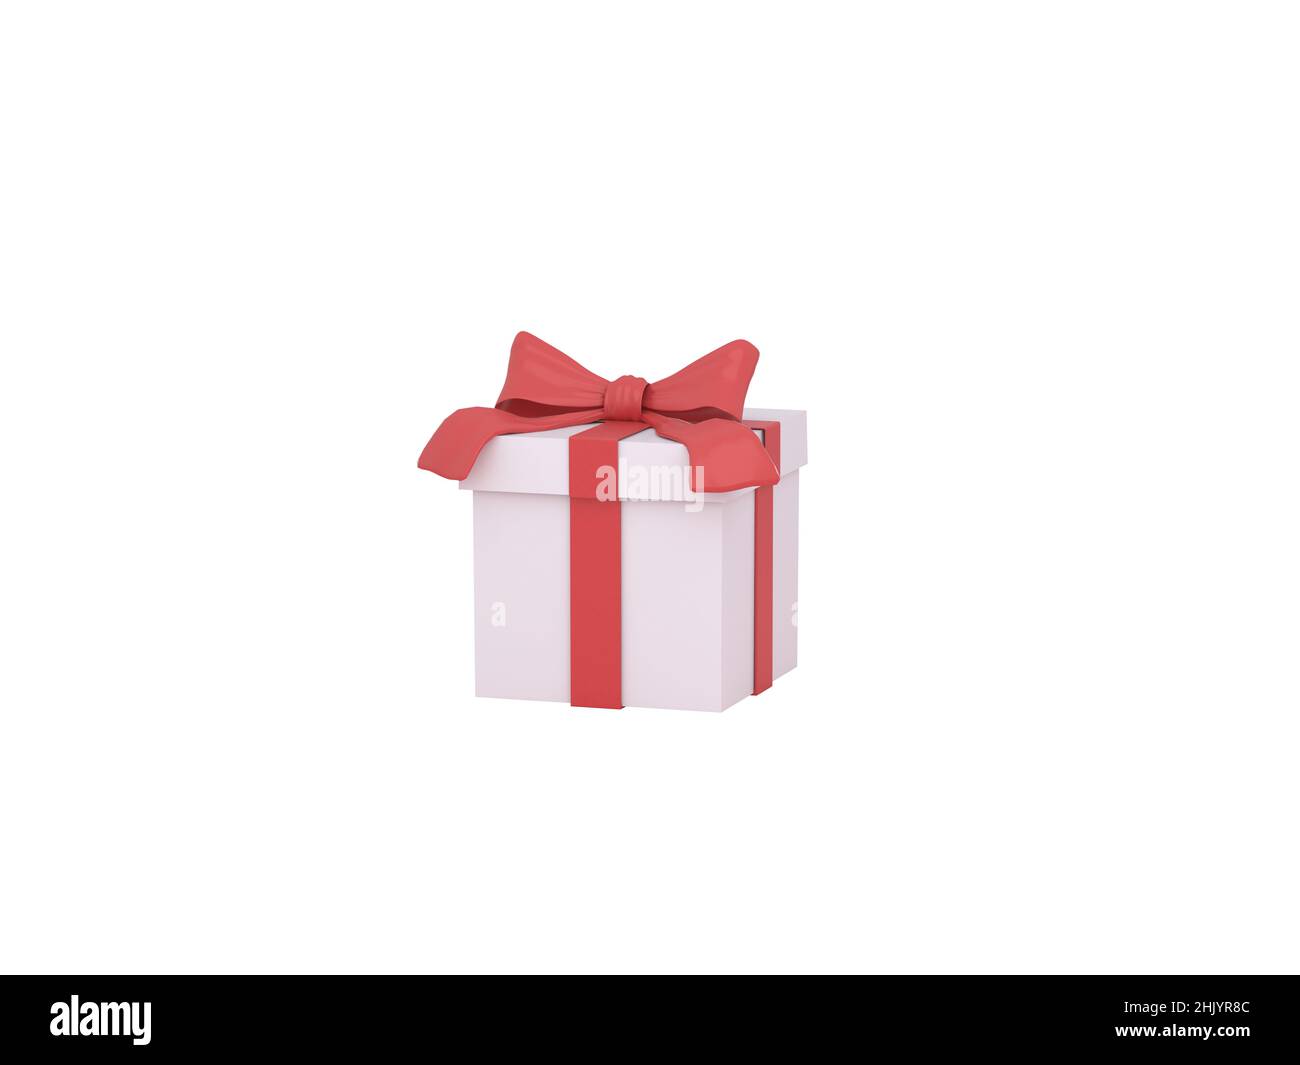 Box Gif With a red ribbon. Isolated. 3d Illustration. Isolated. Stock Photo